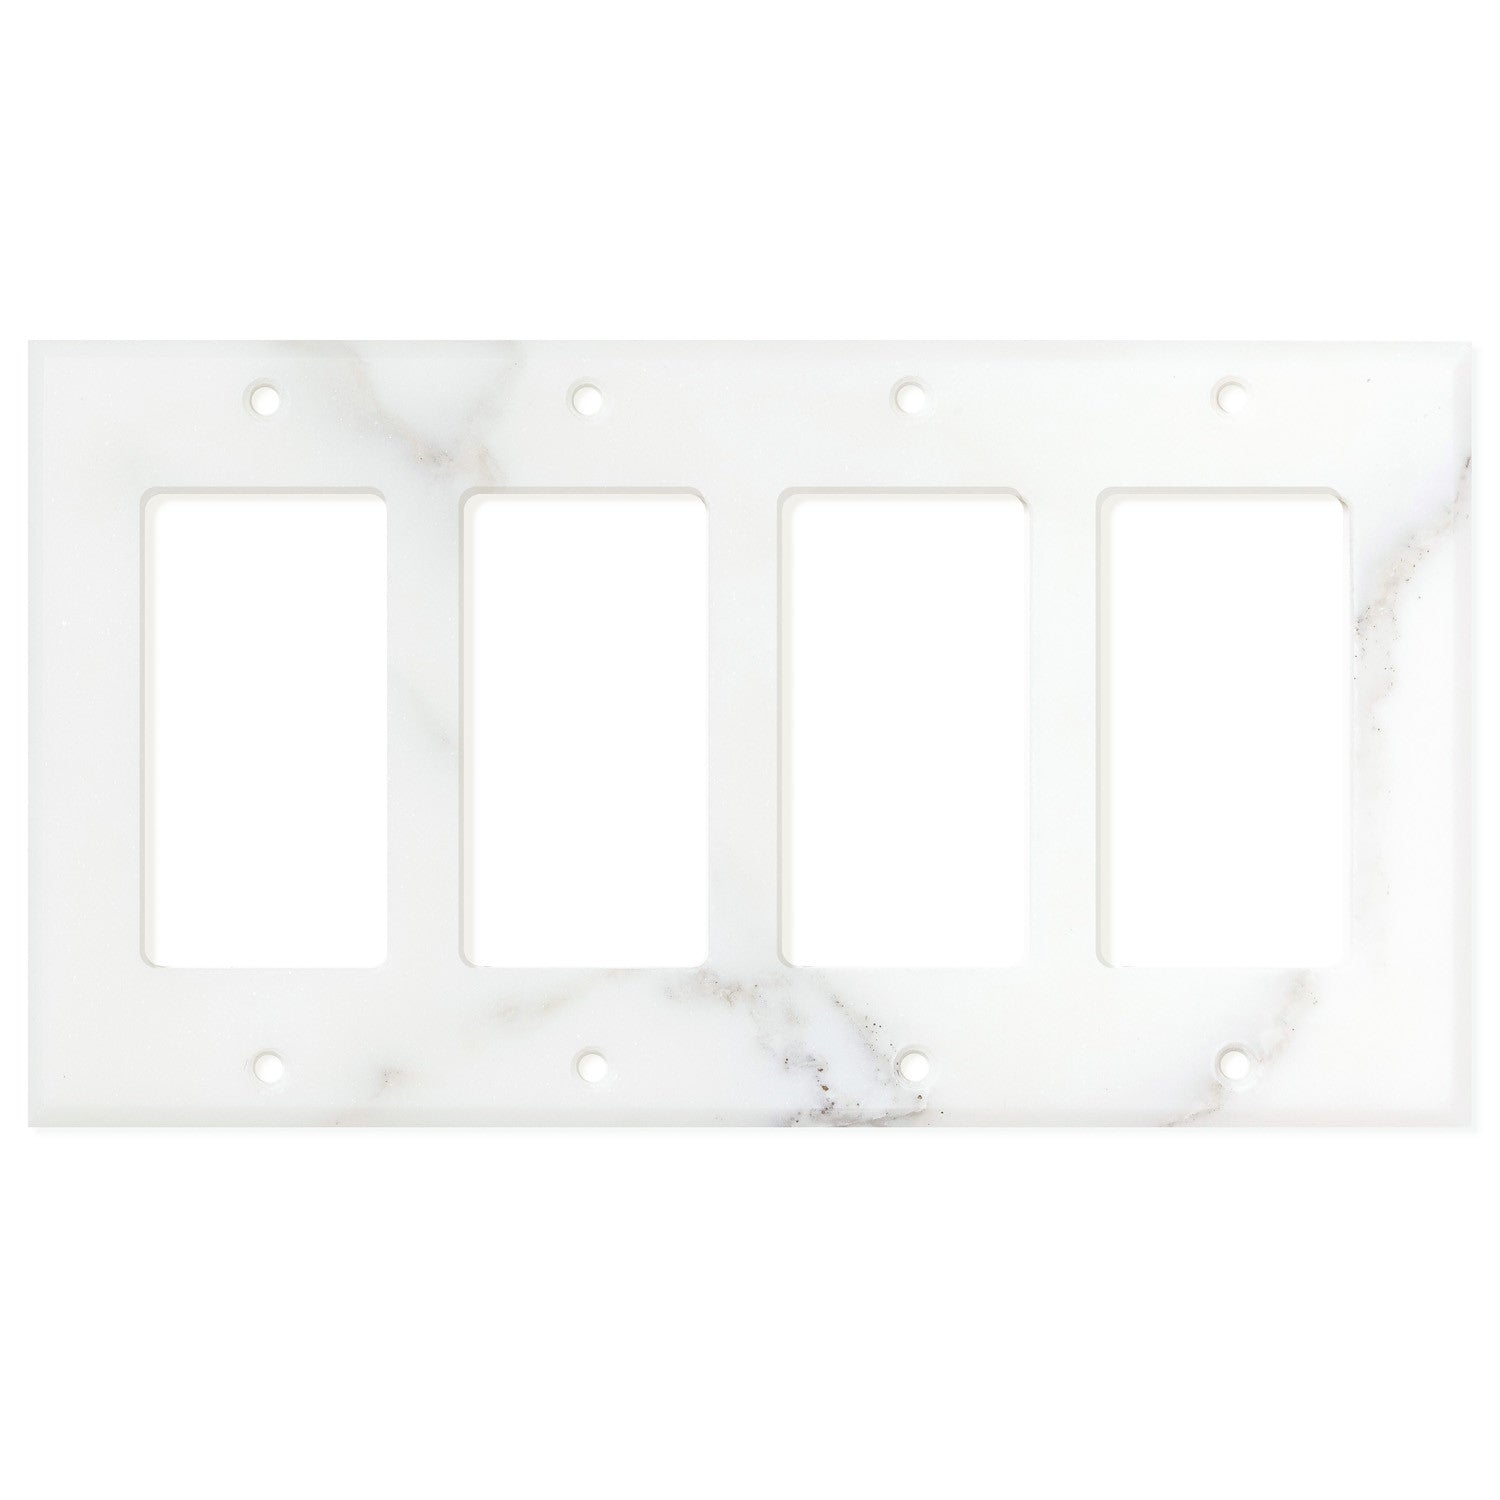 Calacatta Gold Marble Switch Plate Cover, Polished (4 ROCKER) - Tilephile